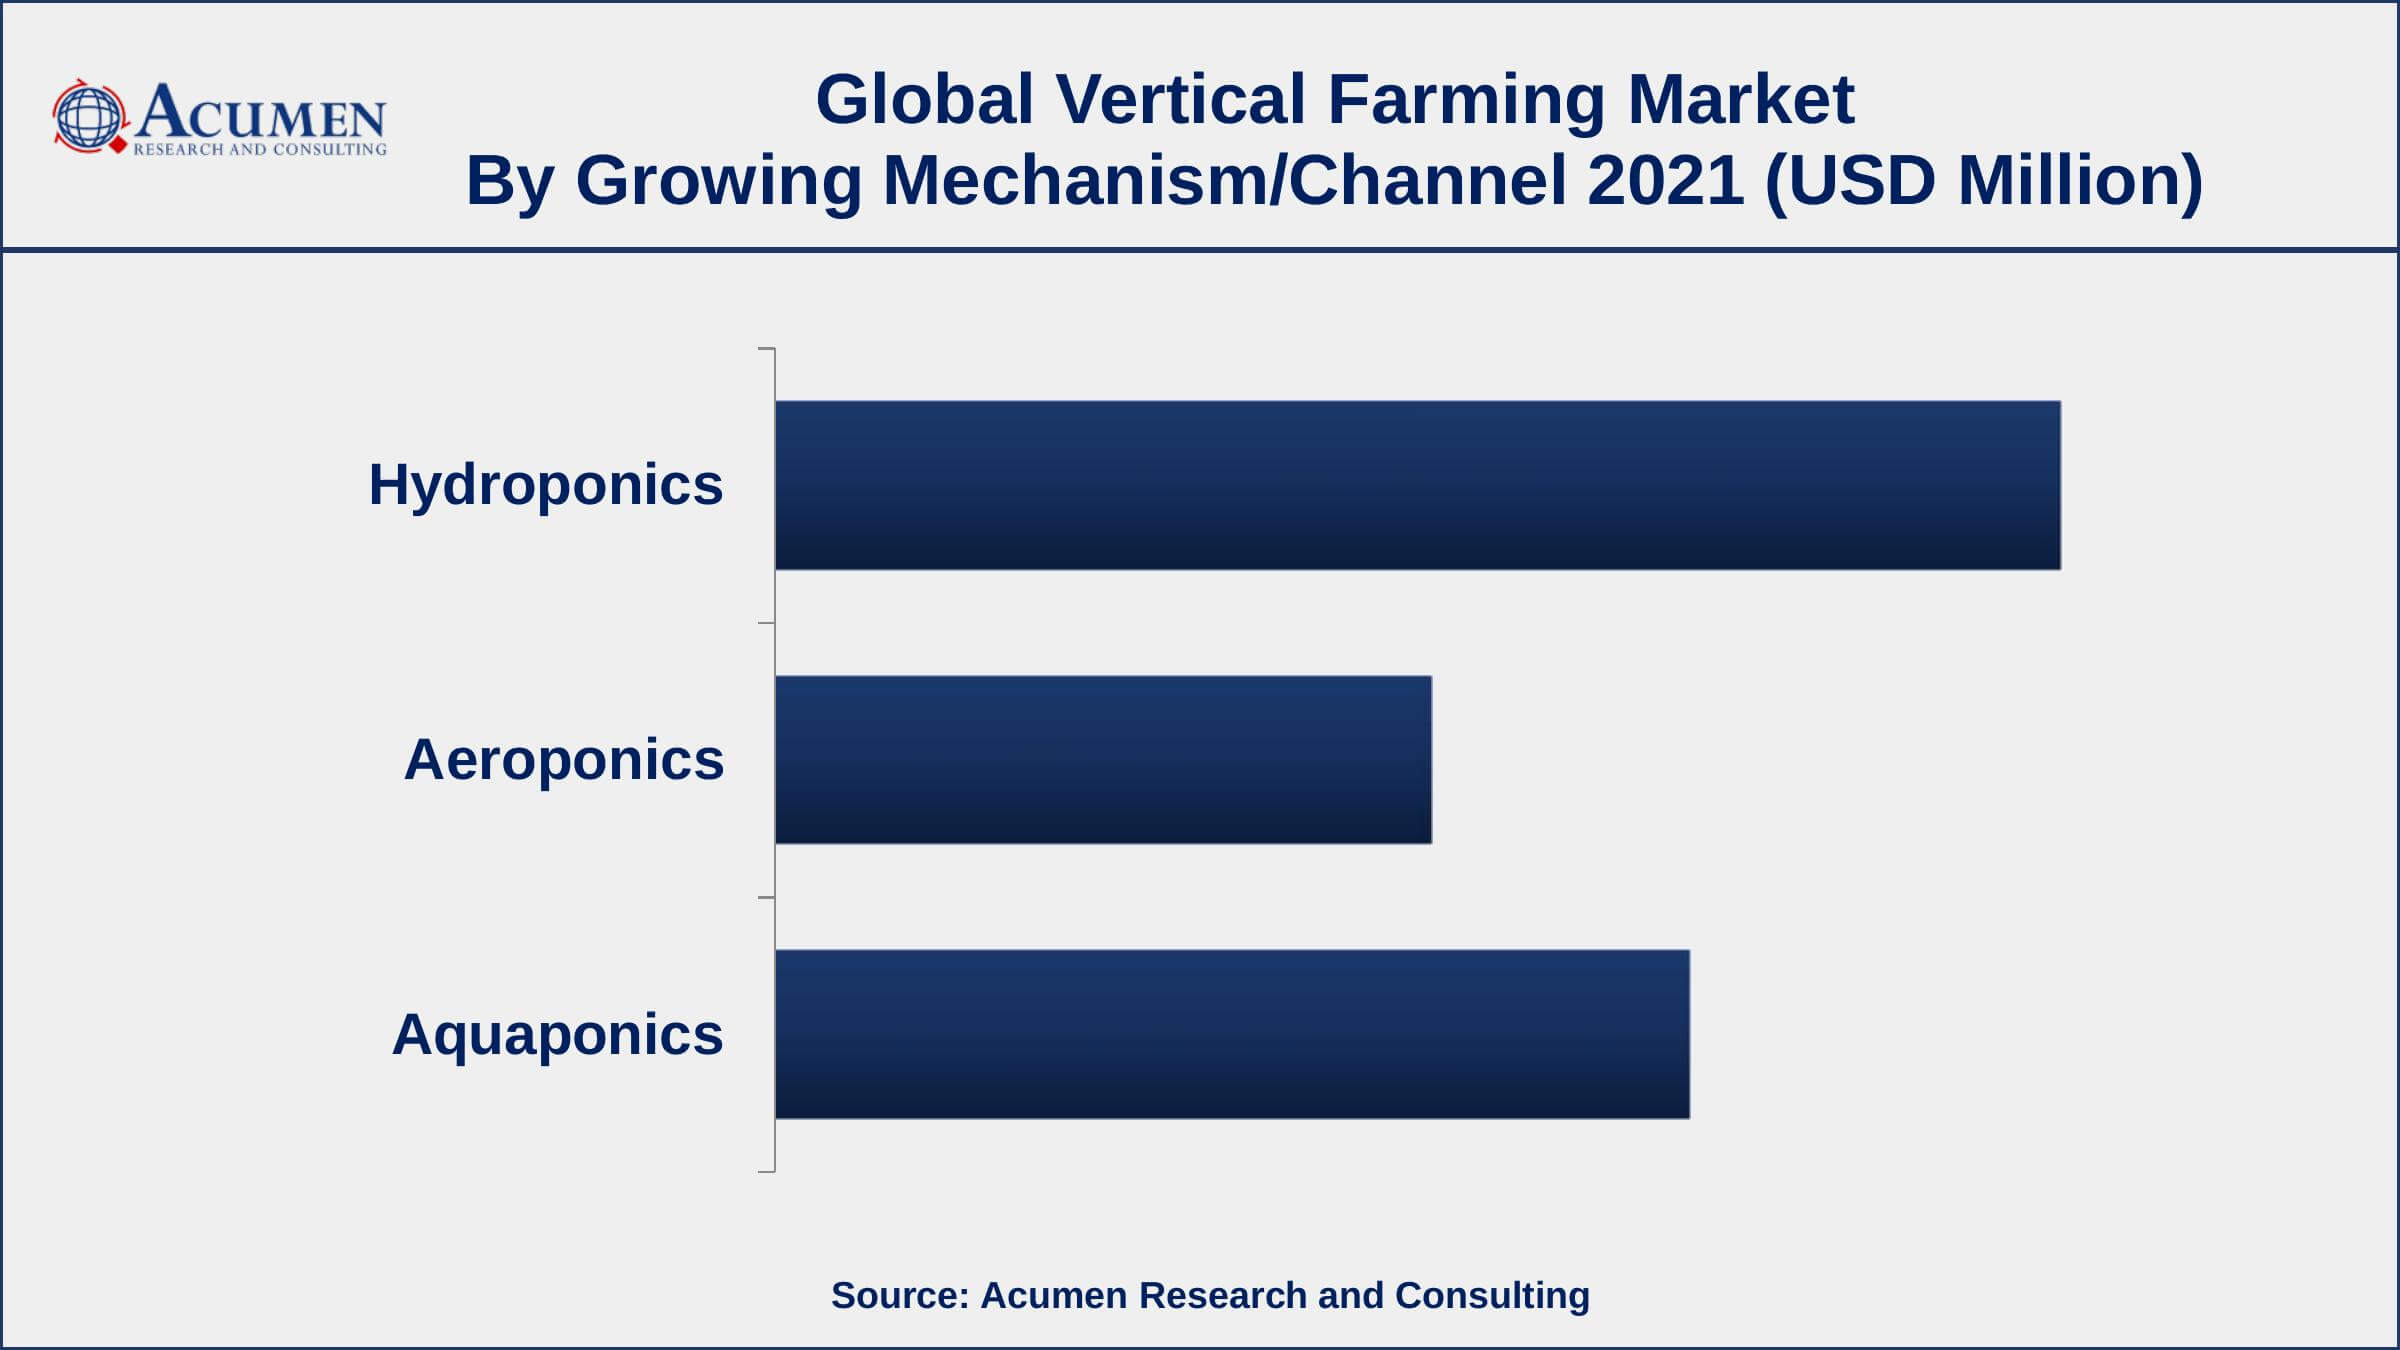 By growing mechanism/channel, hydroponics segment generated about 46% market share in 2021